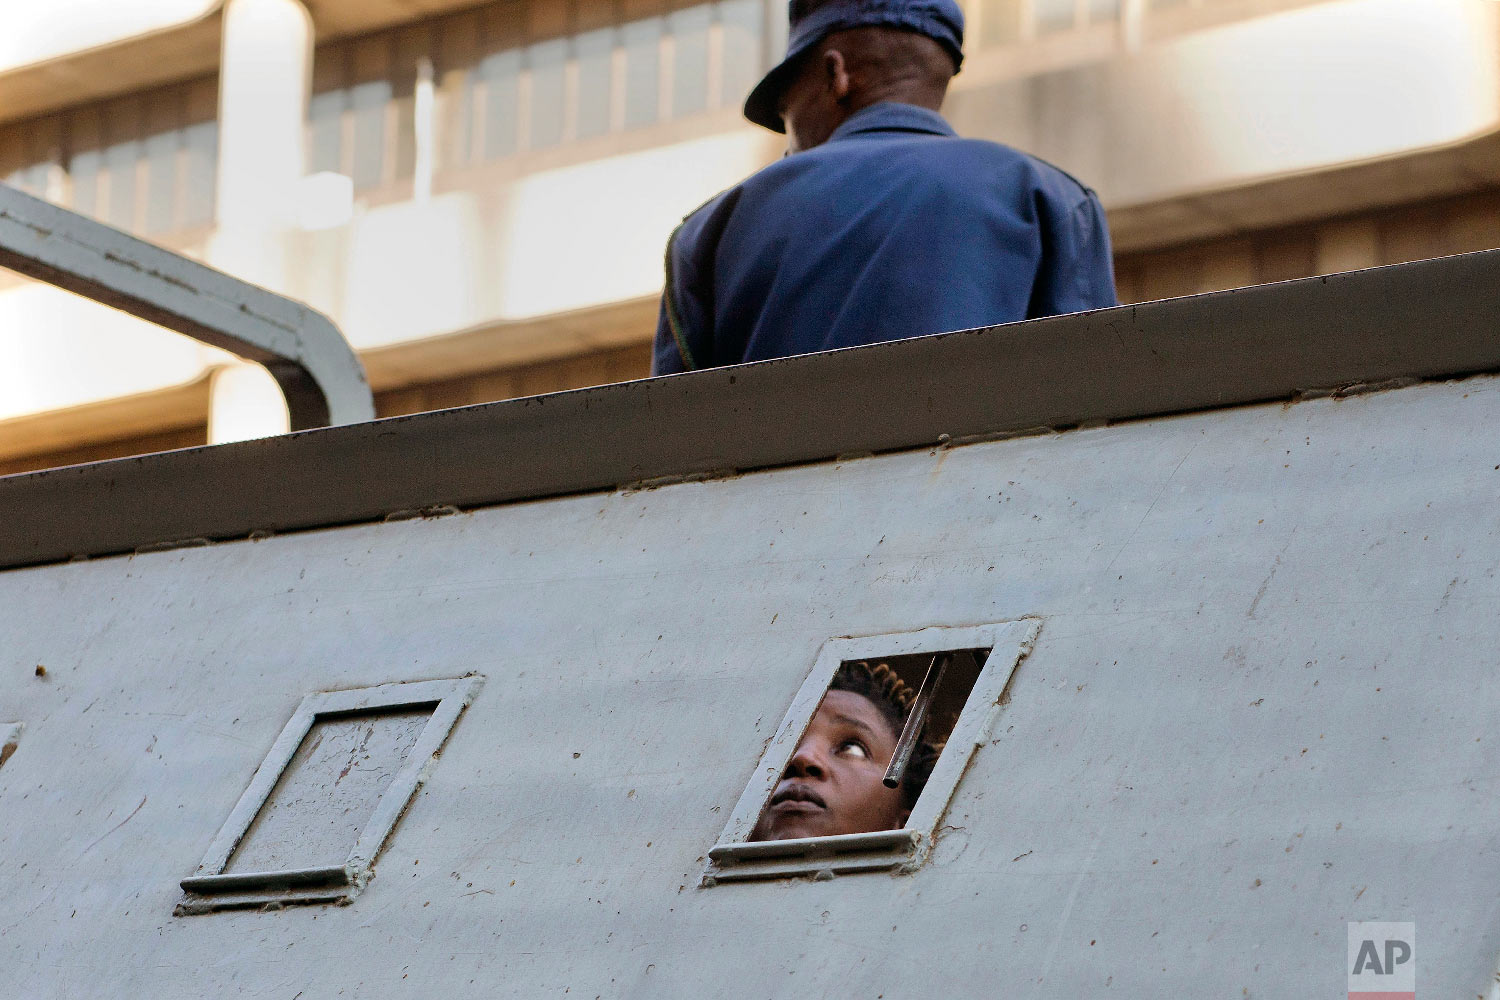  A supporter of Zimbabwean's main opposition party MDC, who was arrested following clashes, is seen detained in a police vehicle outside the MDC headquarters, in Harare on Aug. 2, 2018. (AP Photo/Jerome Delay) 